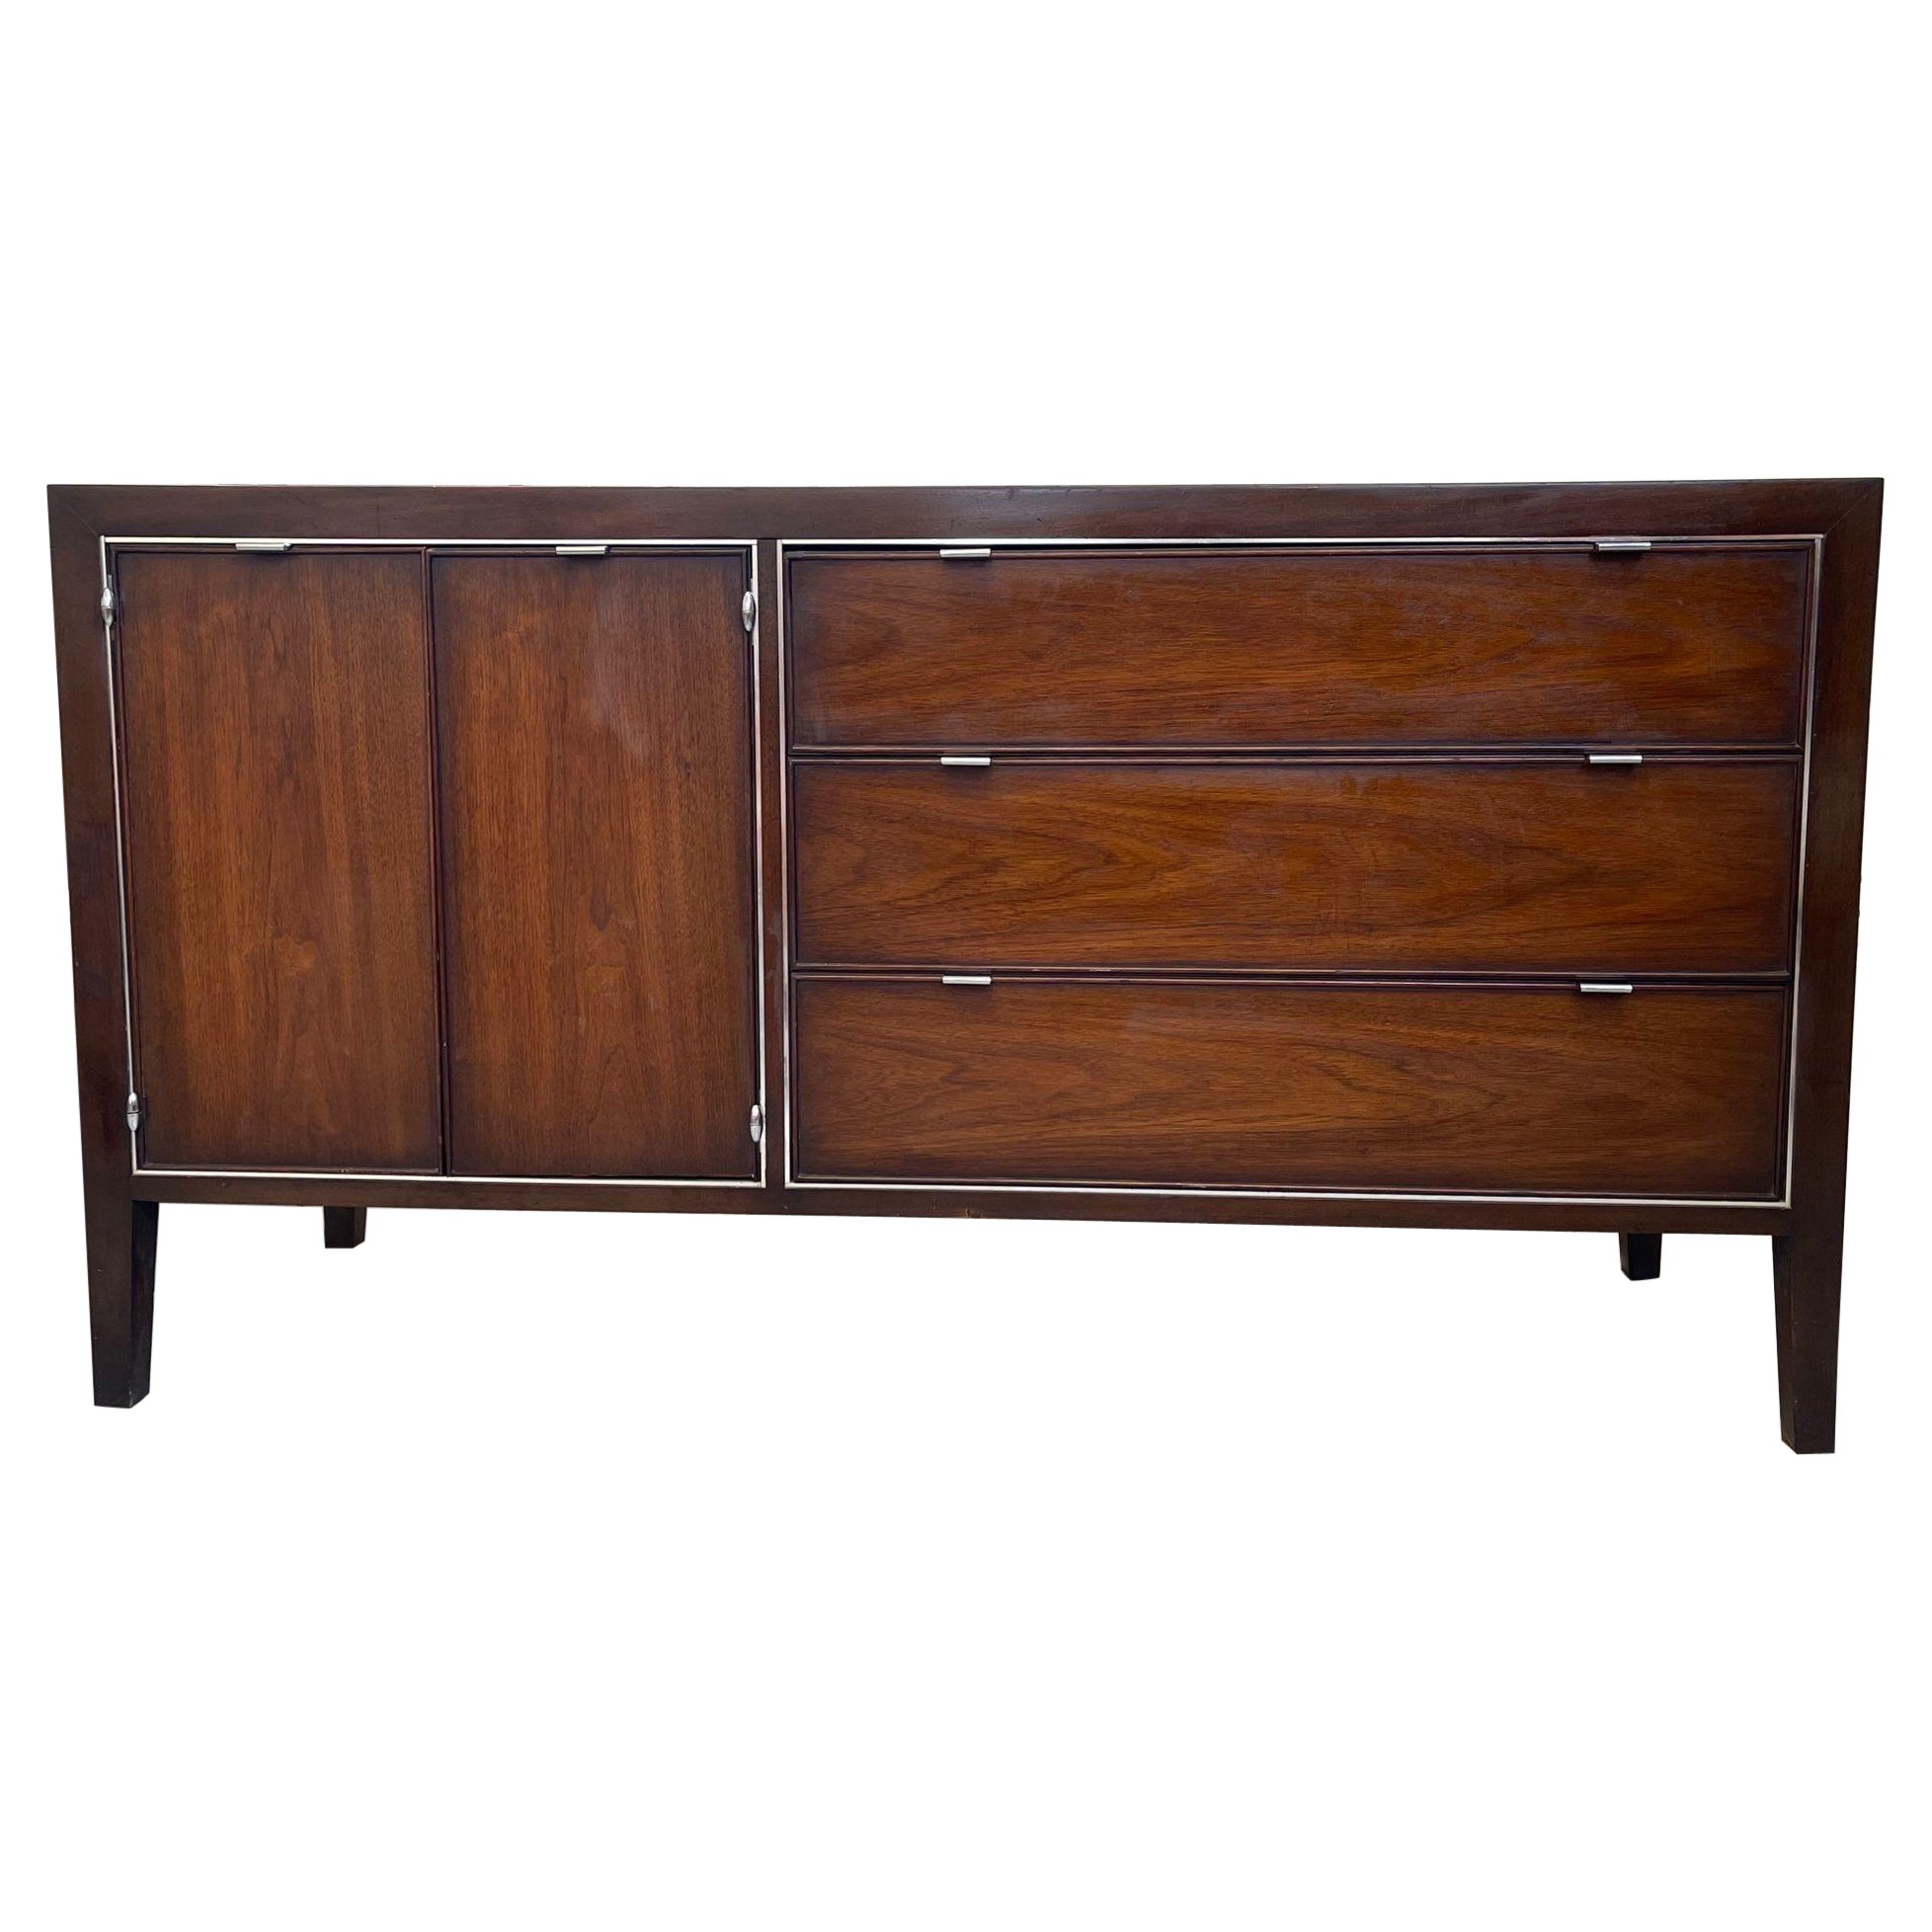 Vintage Mid Century Modern Drexel Credenza Cabinet With Chrome Toned Hardware.